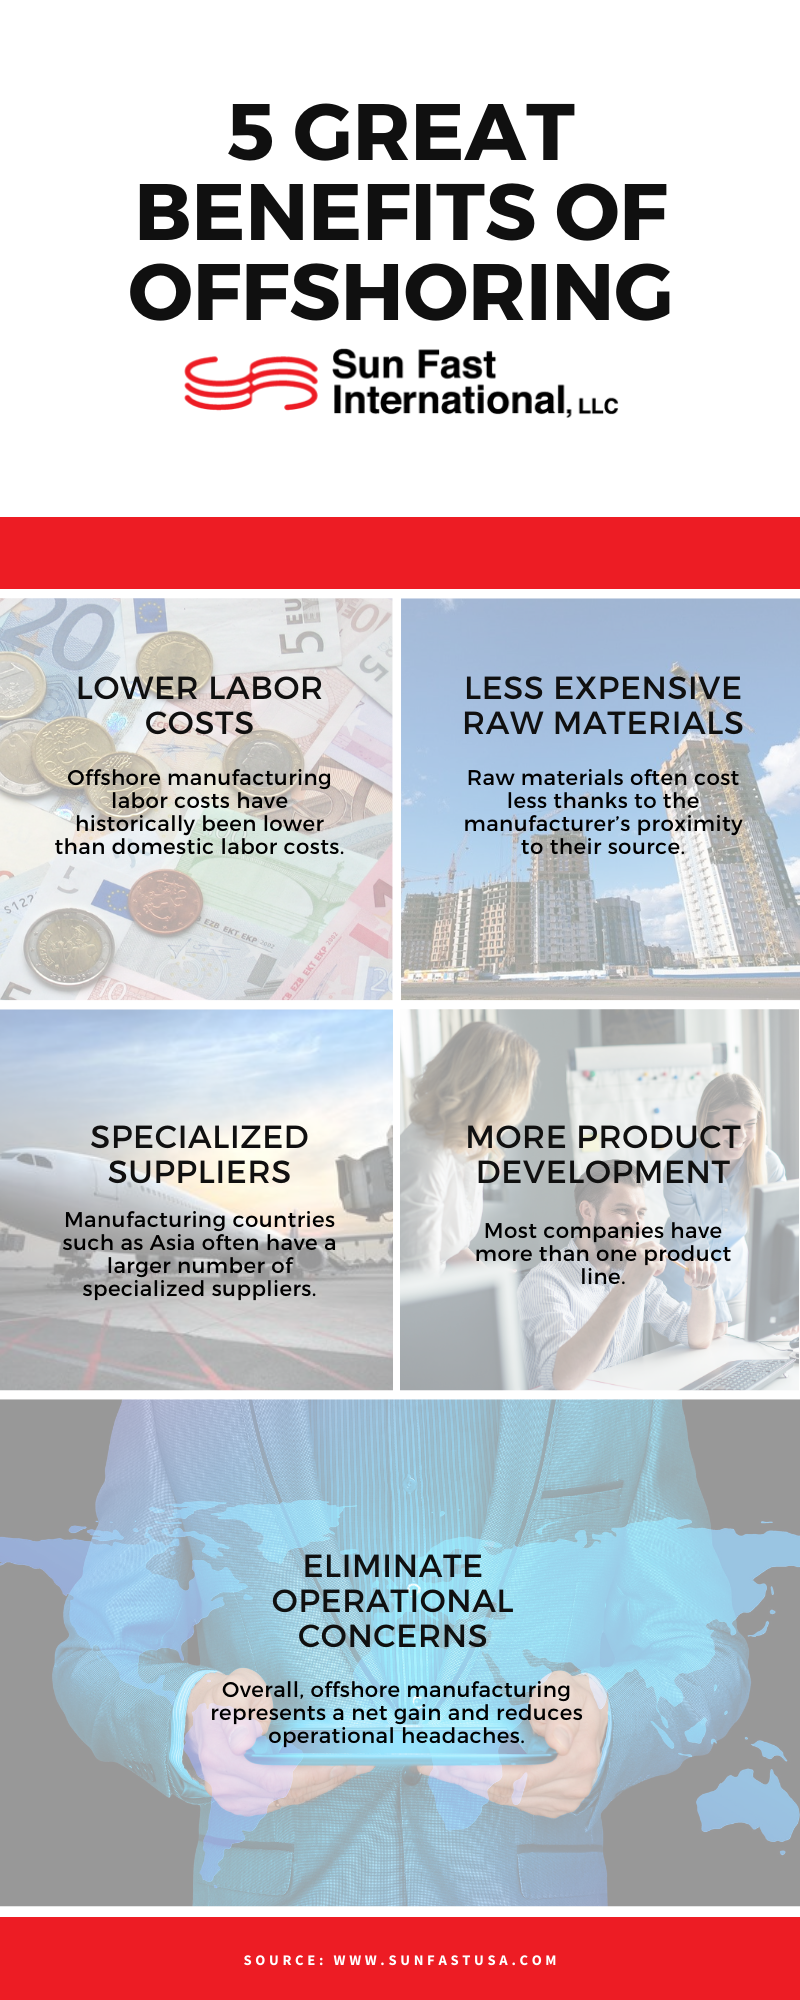 5 Great Benefits of Offshoring Infographic